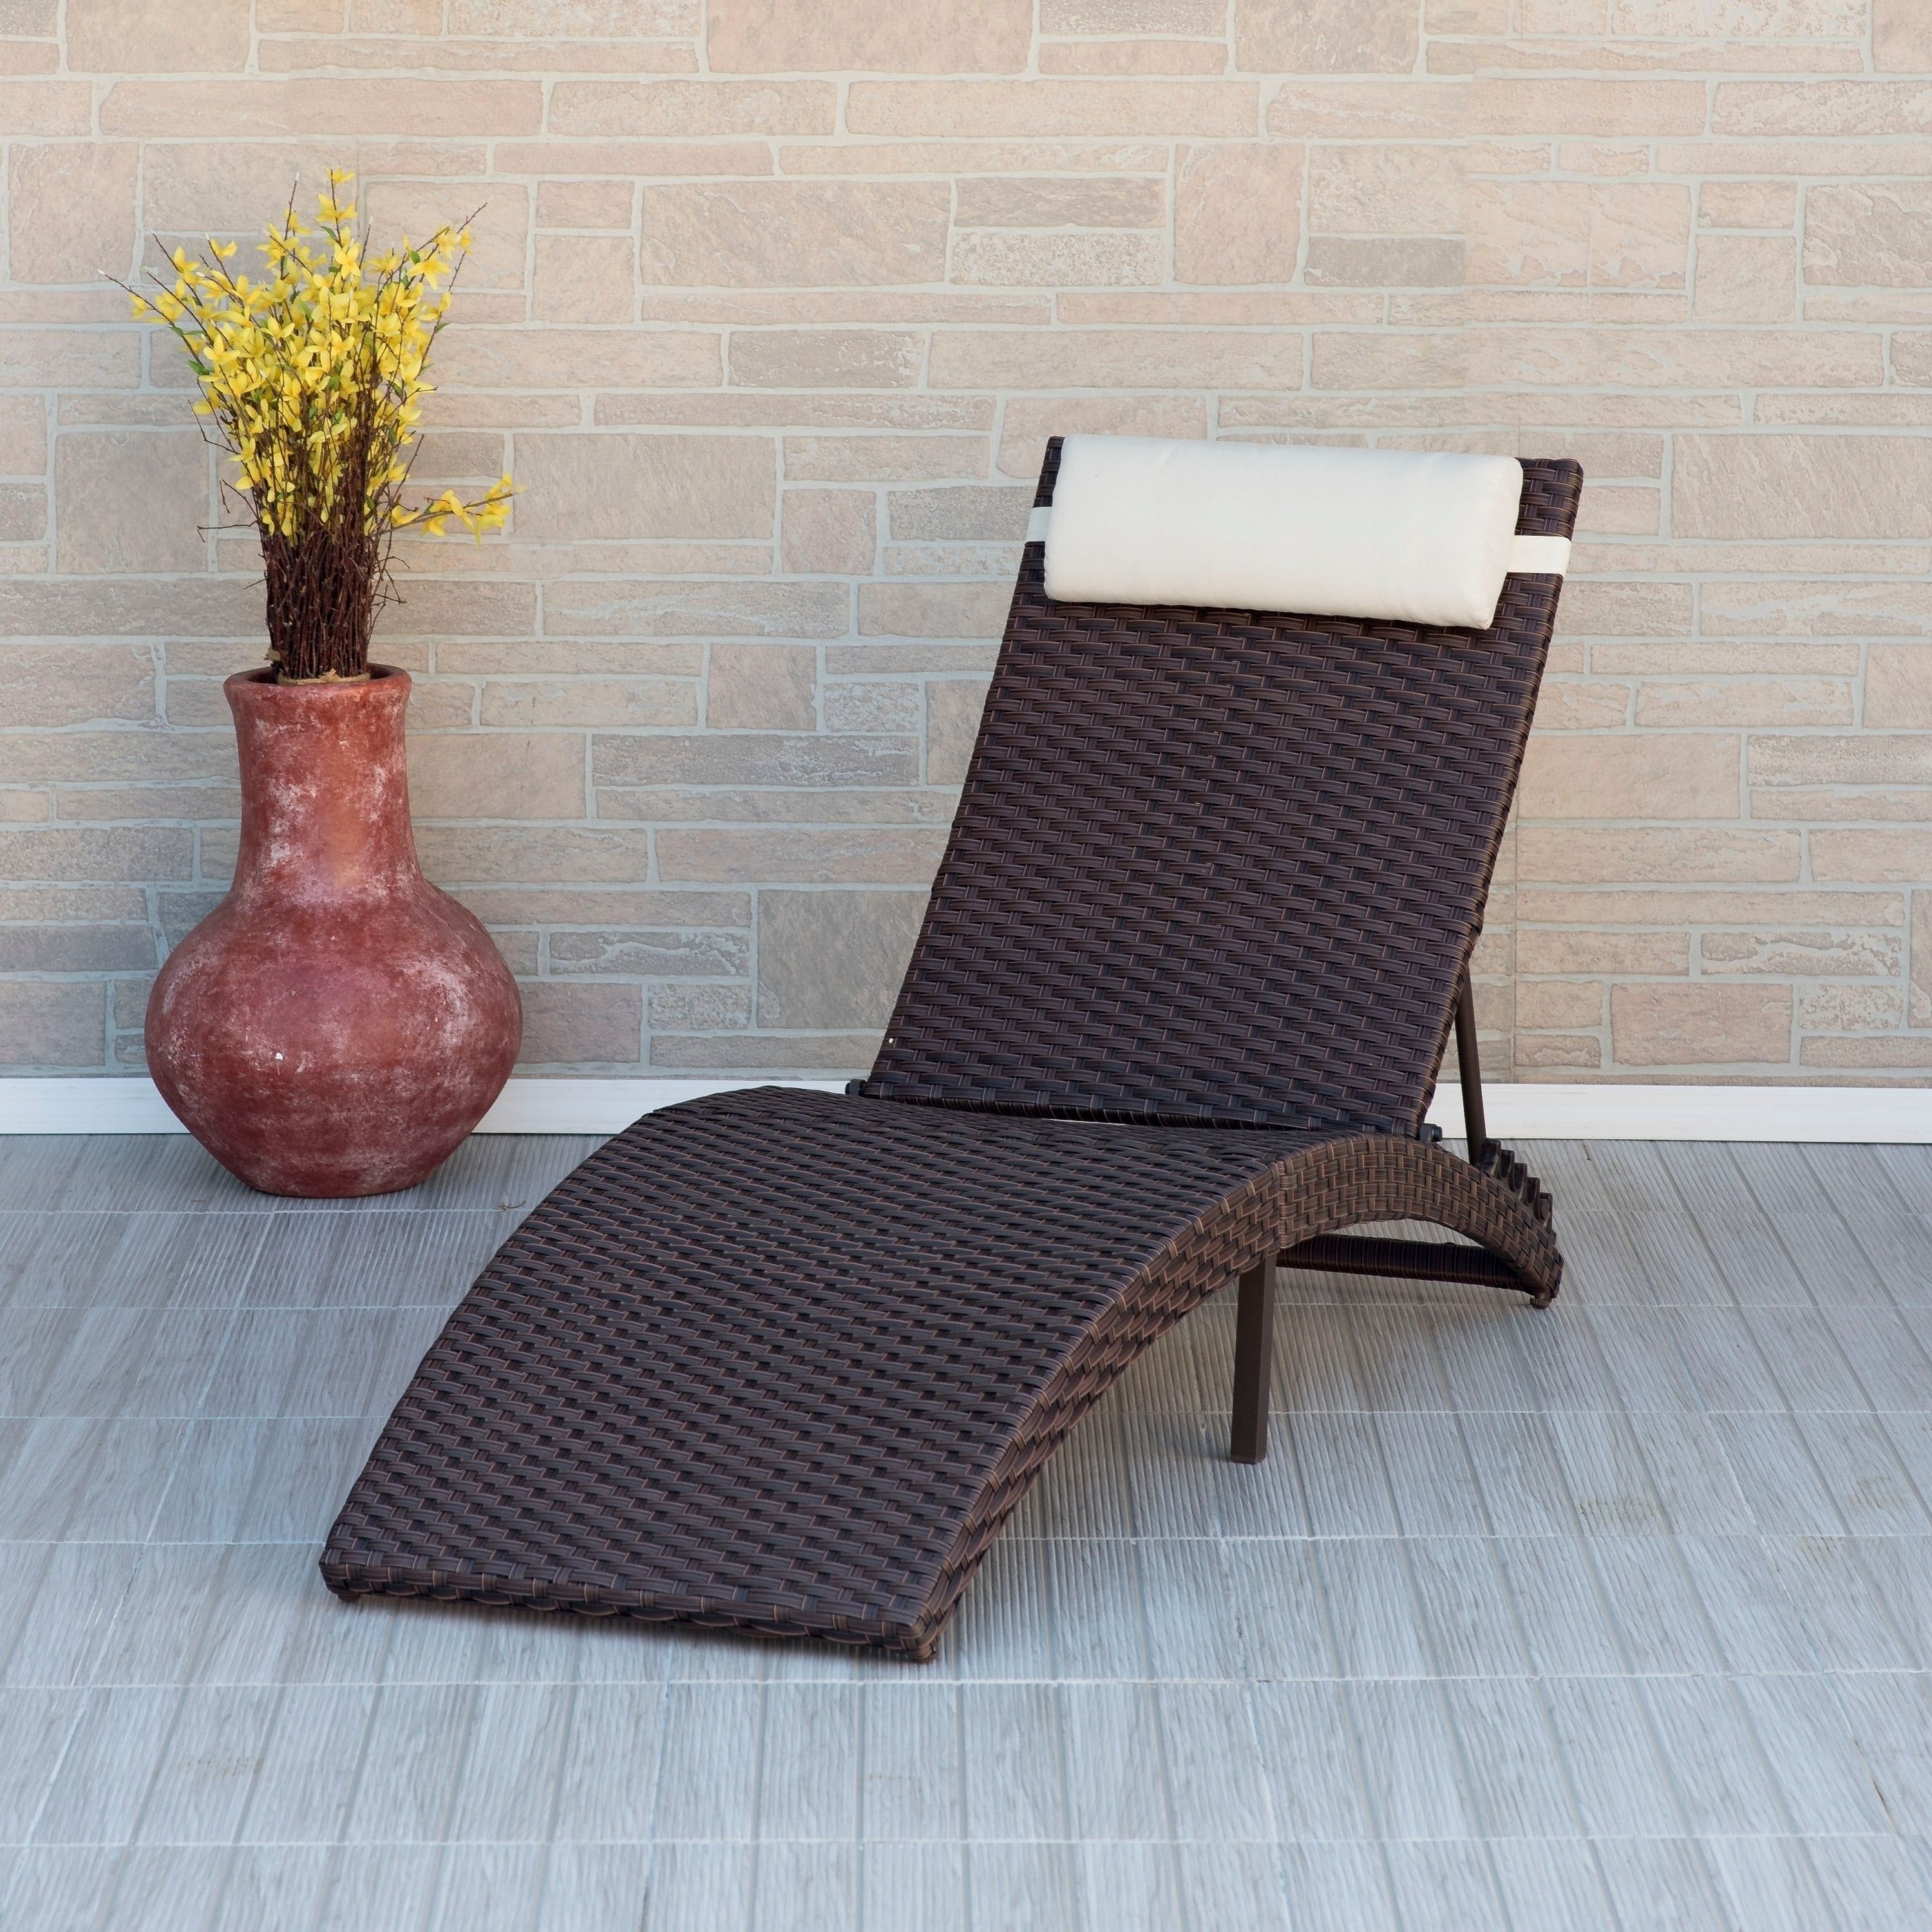 Brown Folding Patio Chaise Lounger Chairs Pertaining To Favorite Havenside Home Alaganik Brown Folding Patio Chaise Lounger Chair – N/a (View 1 of 25)